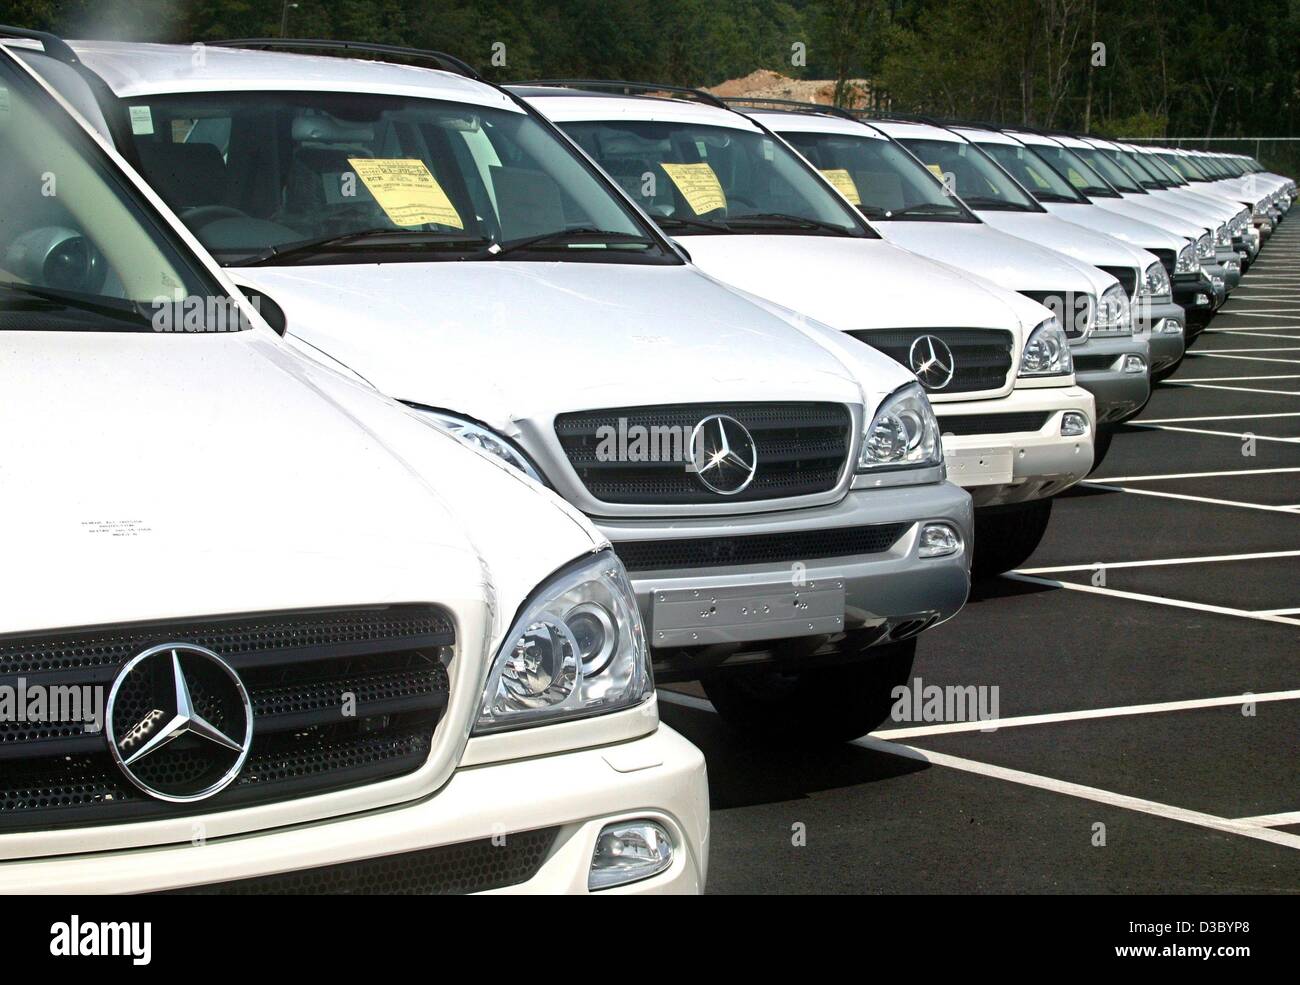 MERCEDES CLASSE M suche-mercedes-benz-ml-w164-350-cdi-weiss Used - the  parking